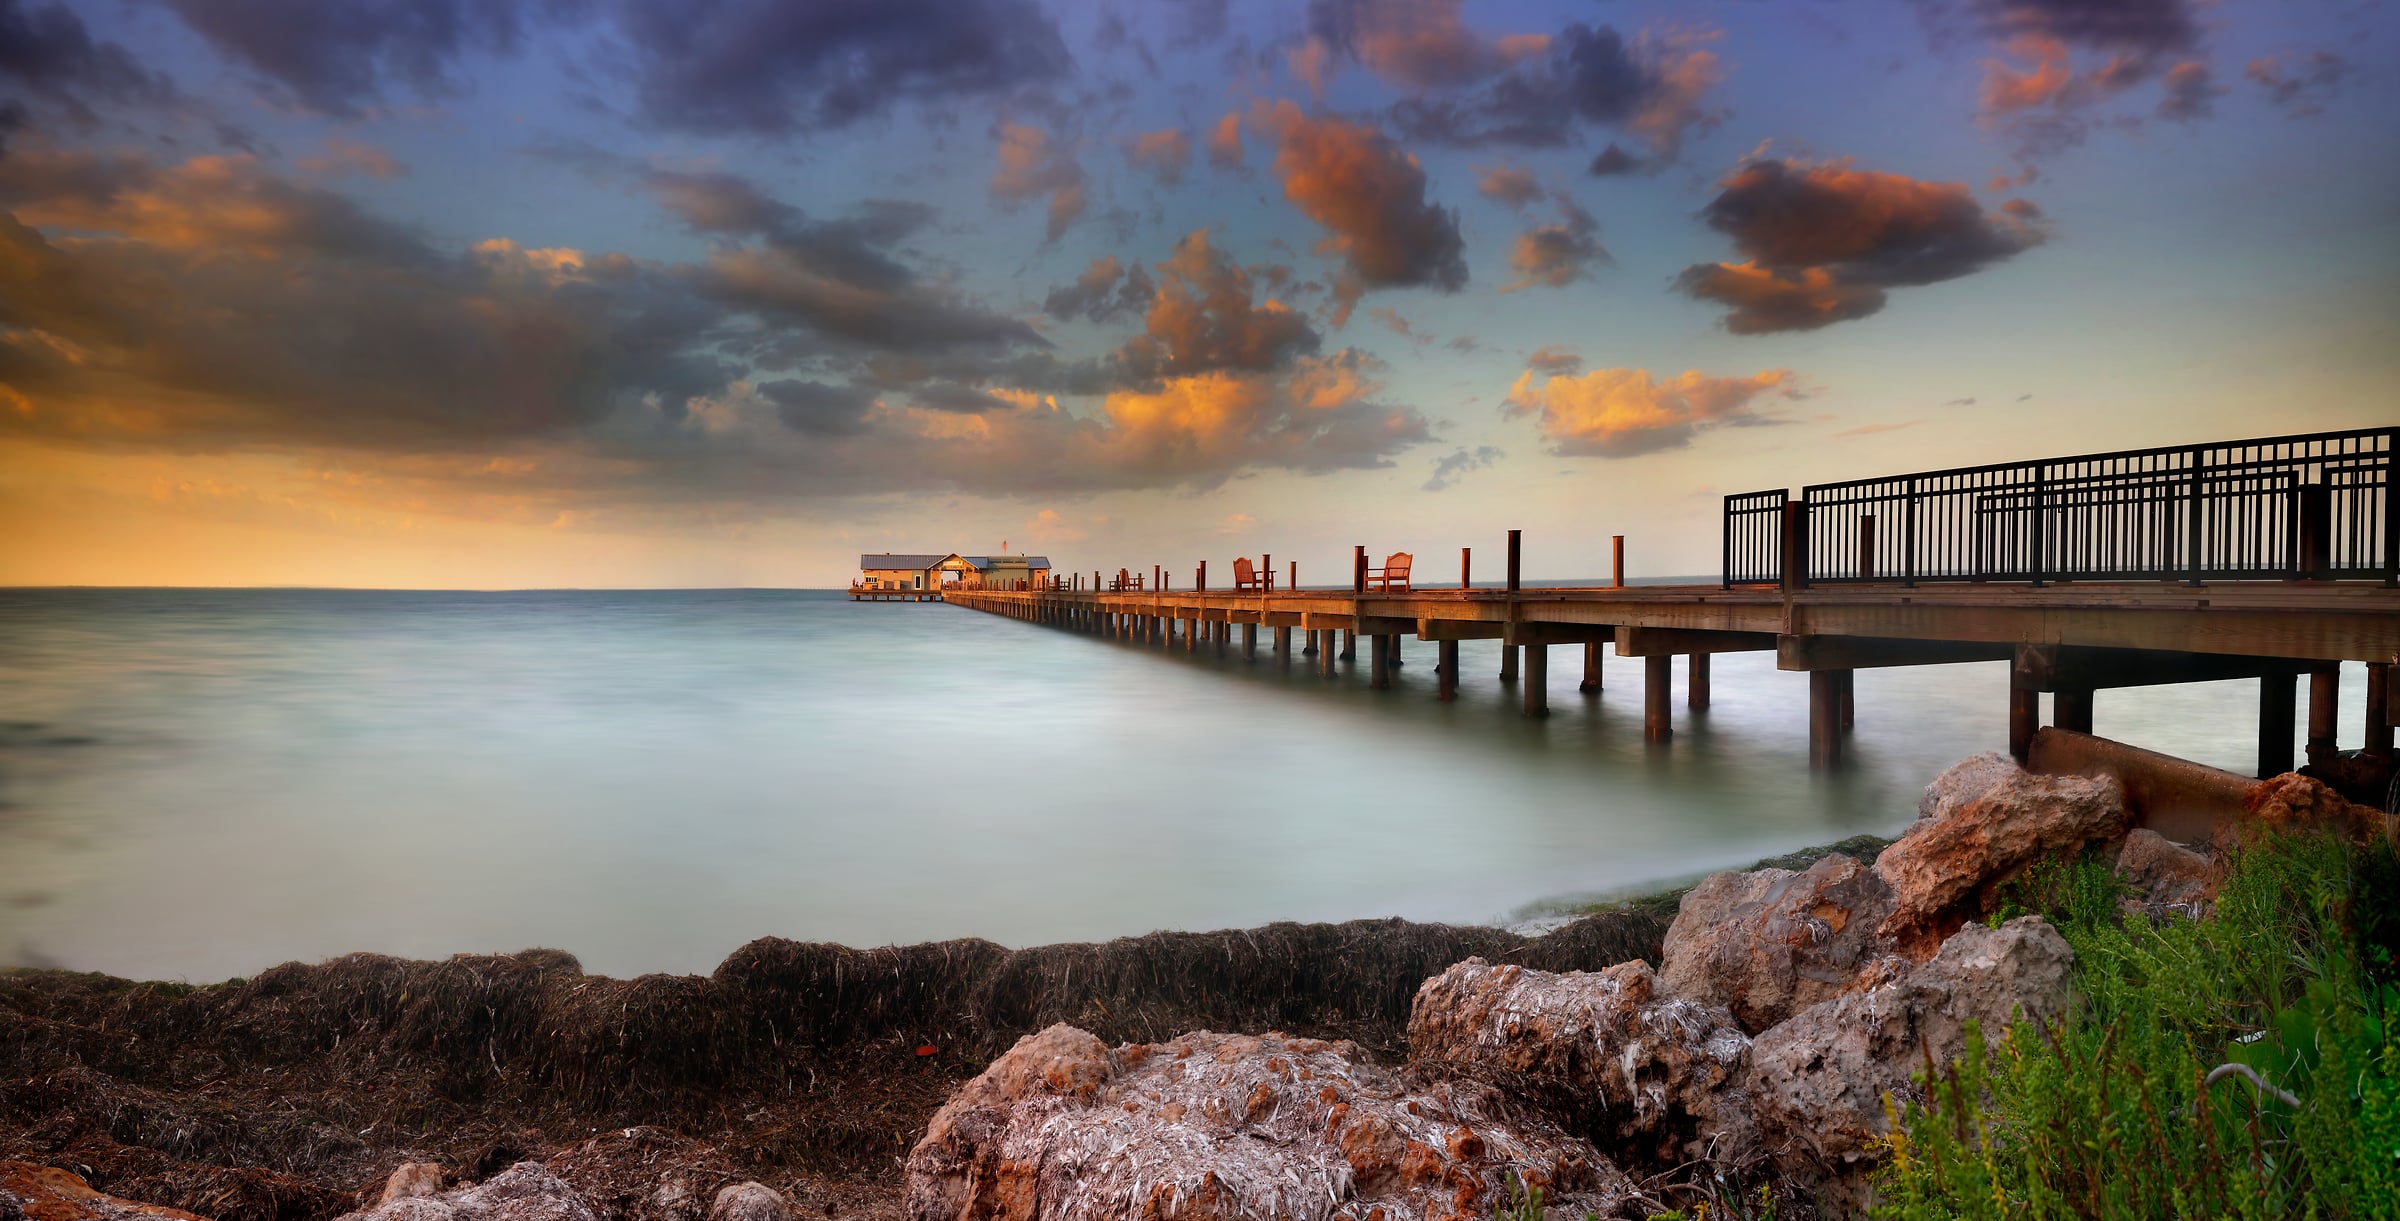 256 megapixels! A very high resolution, large-format VAST photo print of a pier going out into the water at sunset; photograph created by Phil Crawshay of City Pier in Bayfront Park, Anna Maria Island, Florida.